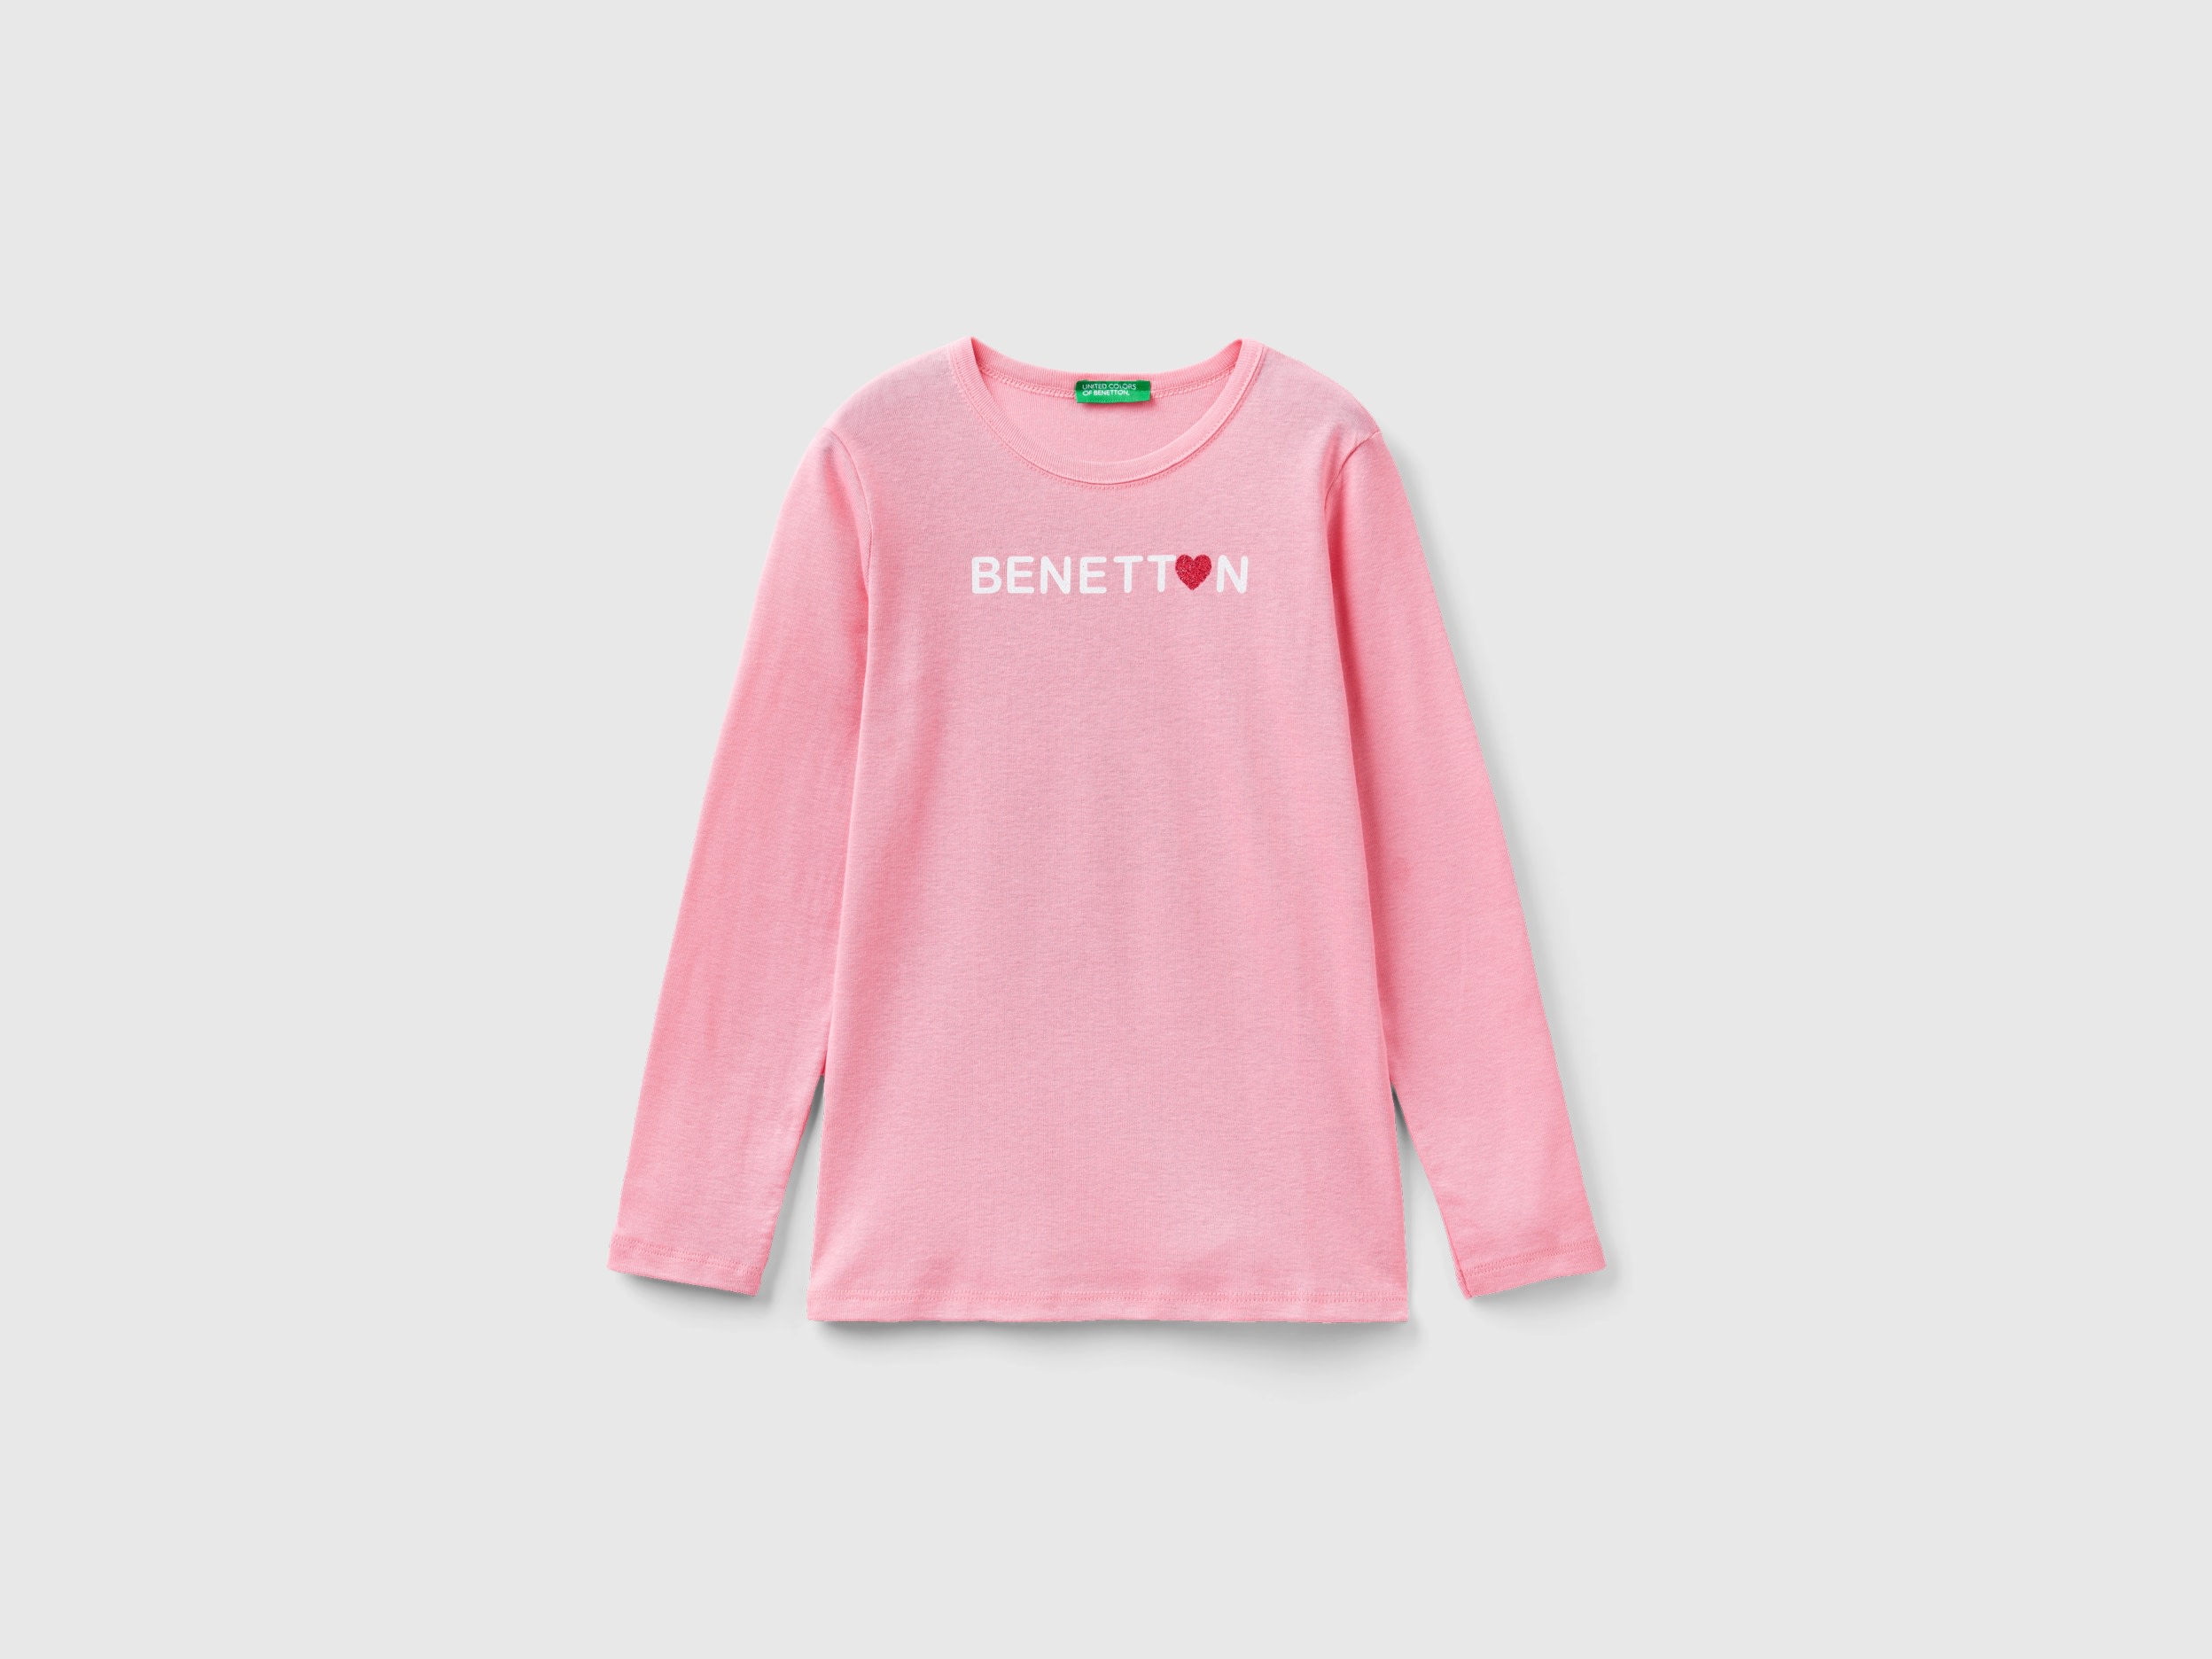 Image of Benetton, Long Sleeve T-shirt With Glitter Print, size 3XL, Pink, Kids